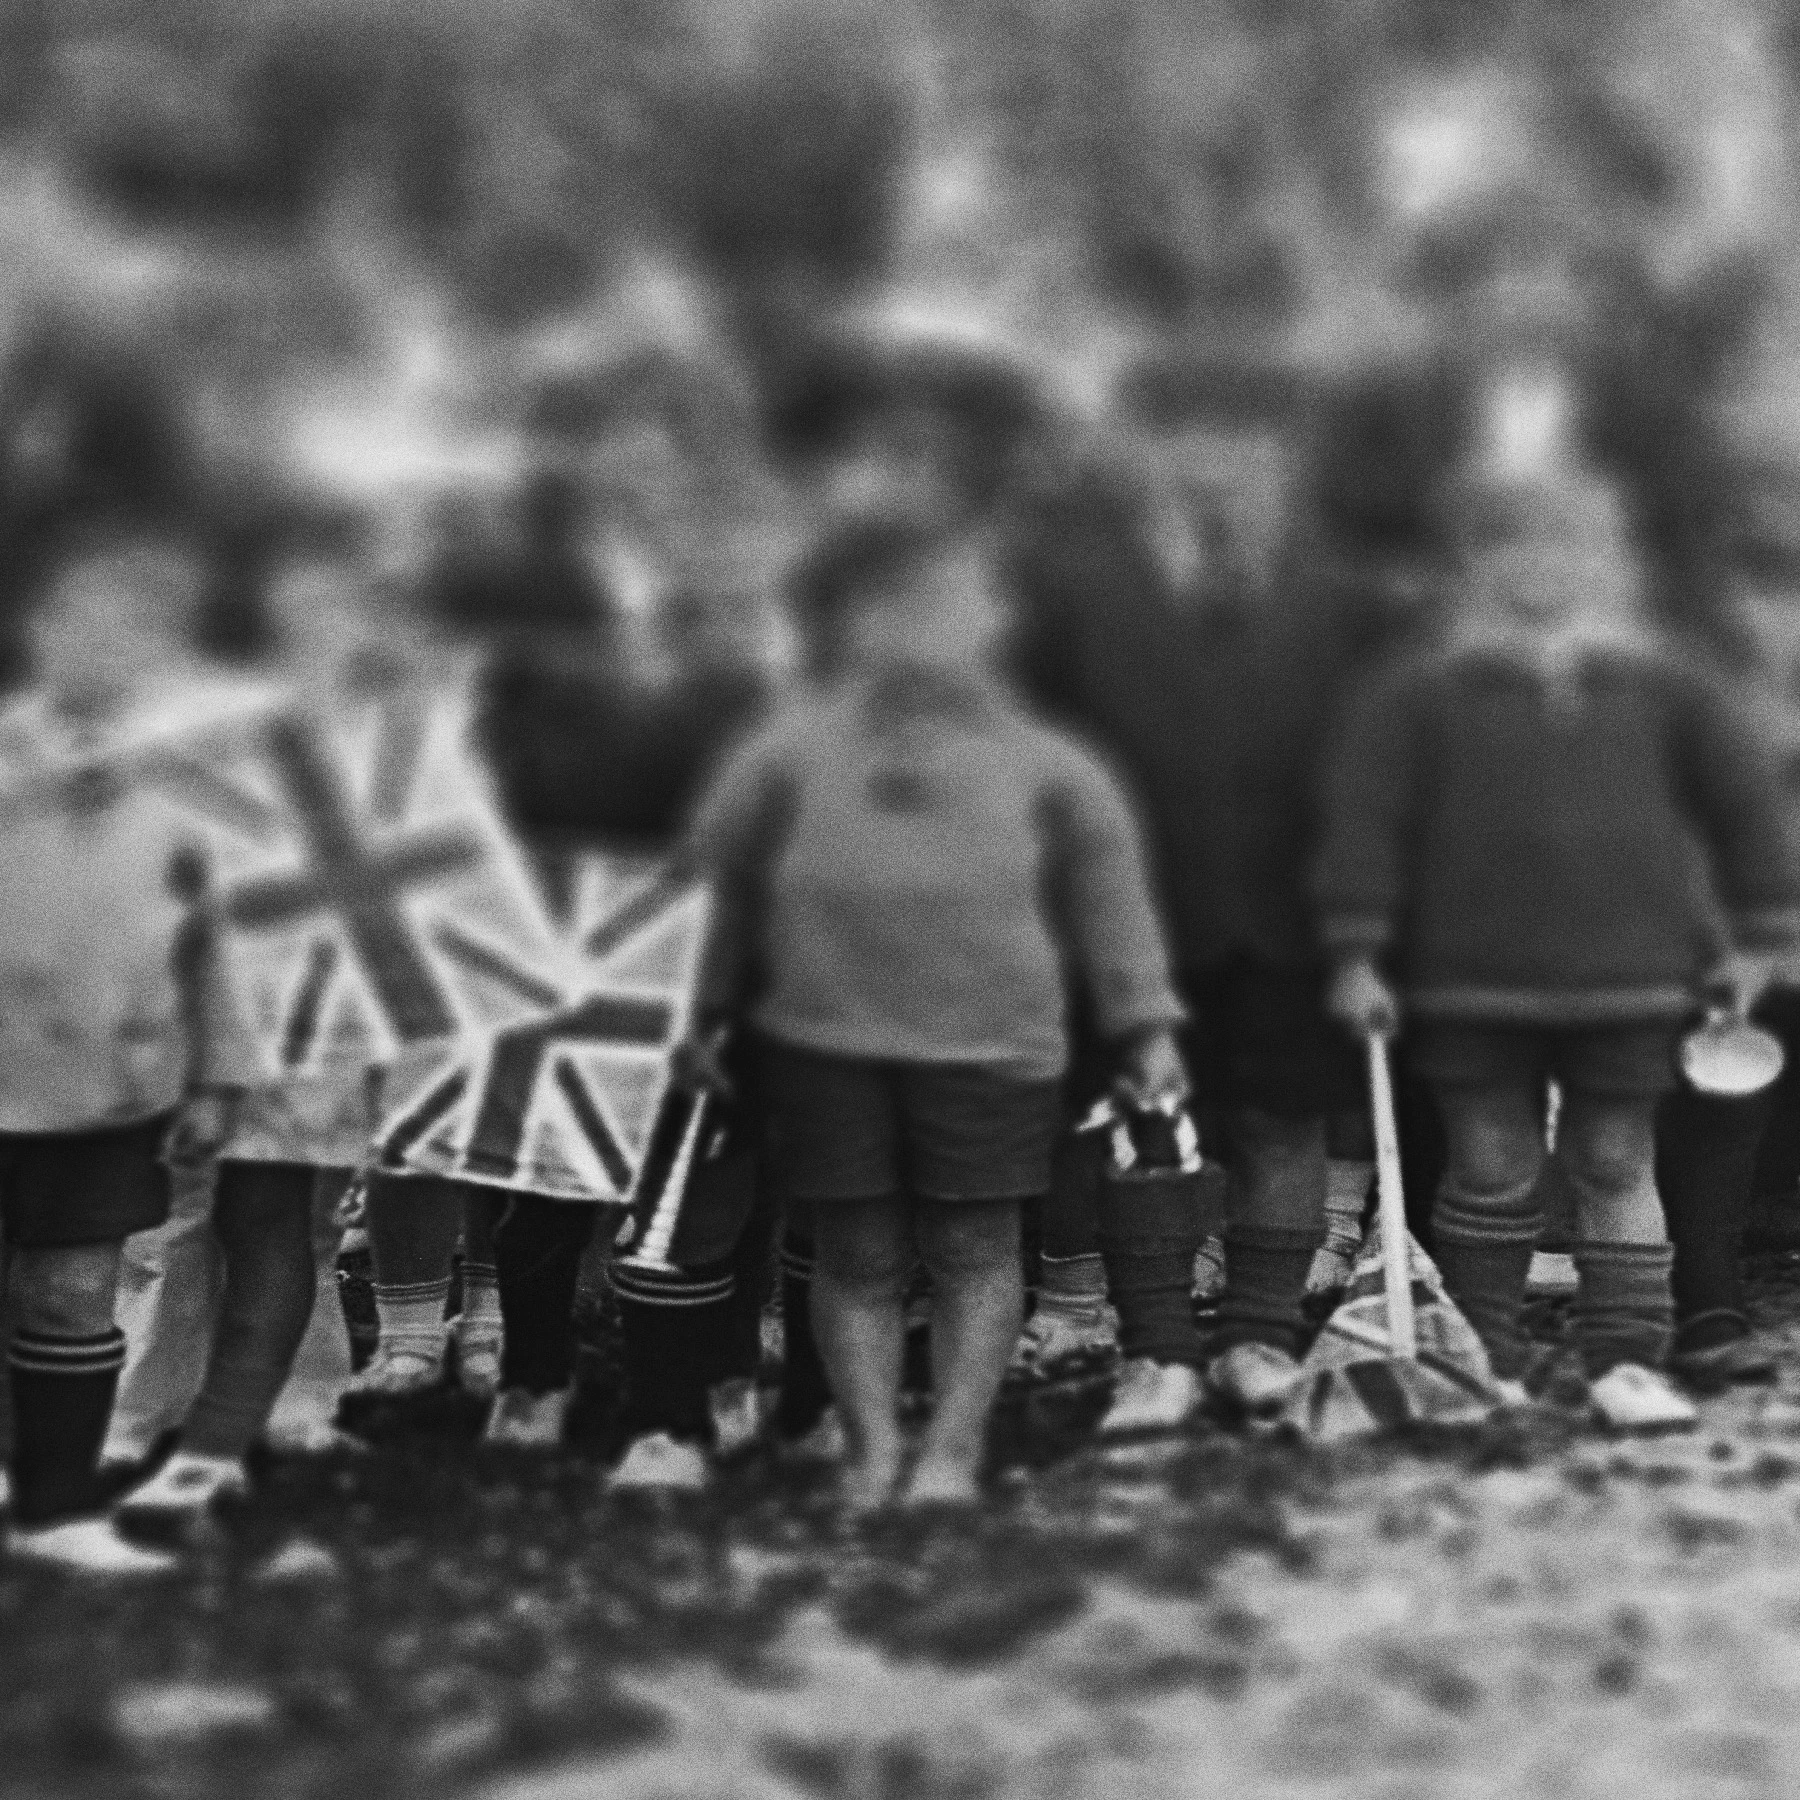 Children holding small flags are grouped together watching something off camera. 